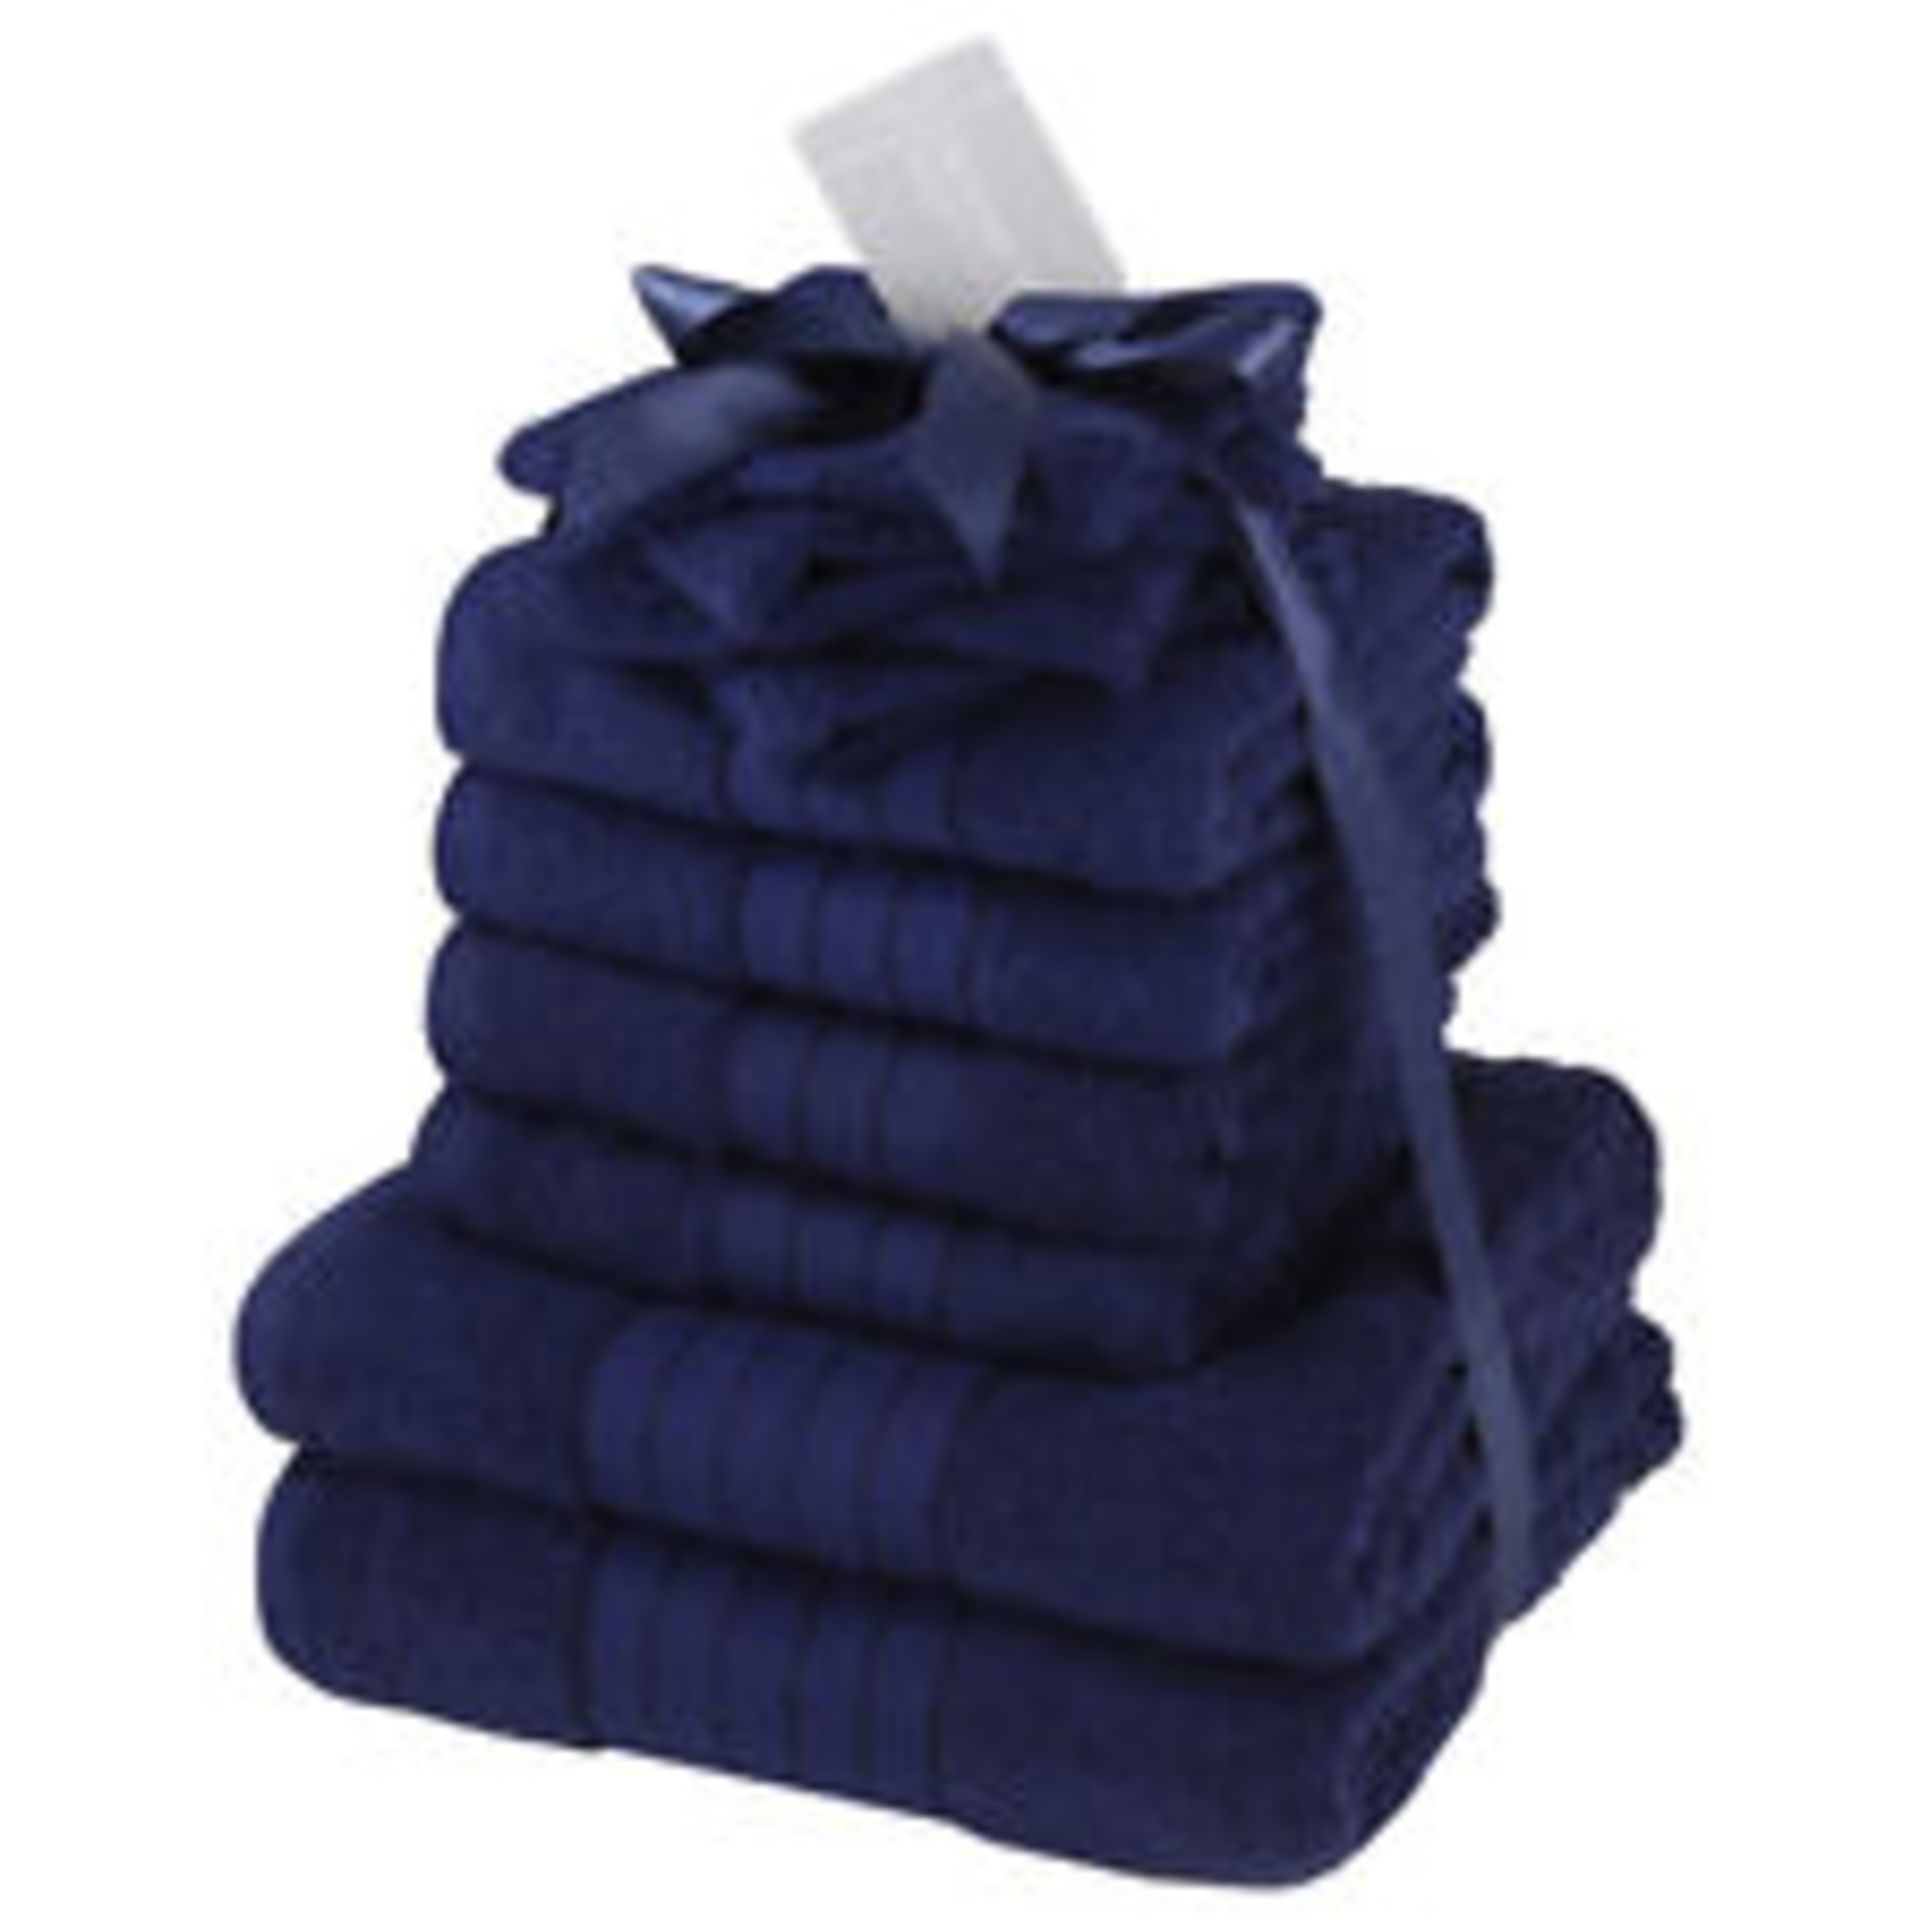 V Brand New Luxury Purple 6 Piece Towel Bale With Two Face Cloths - Two Hand Toweks And Two Bath